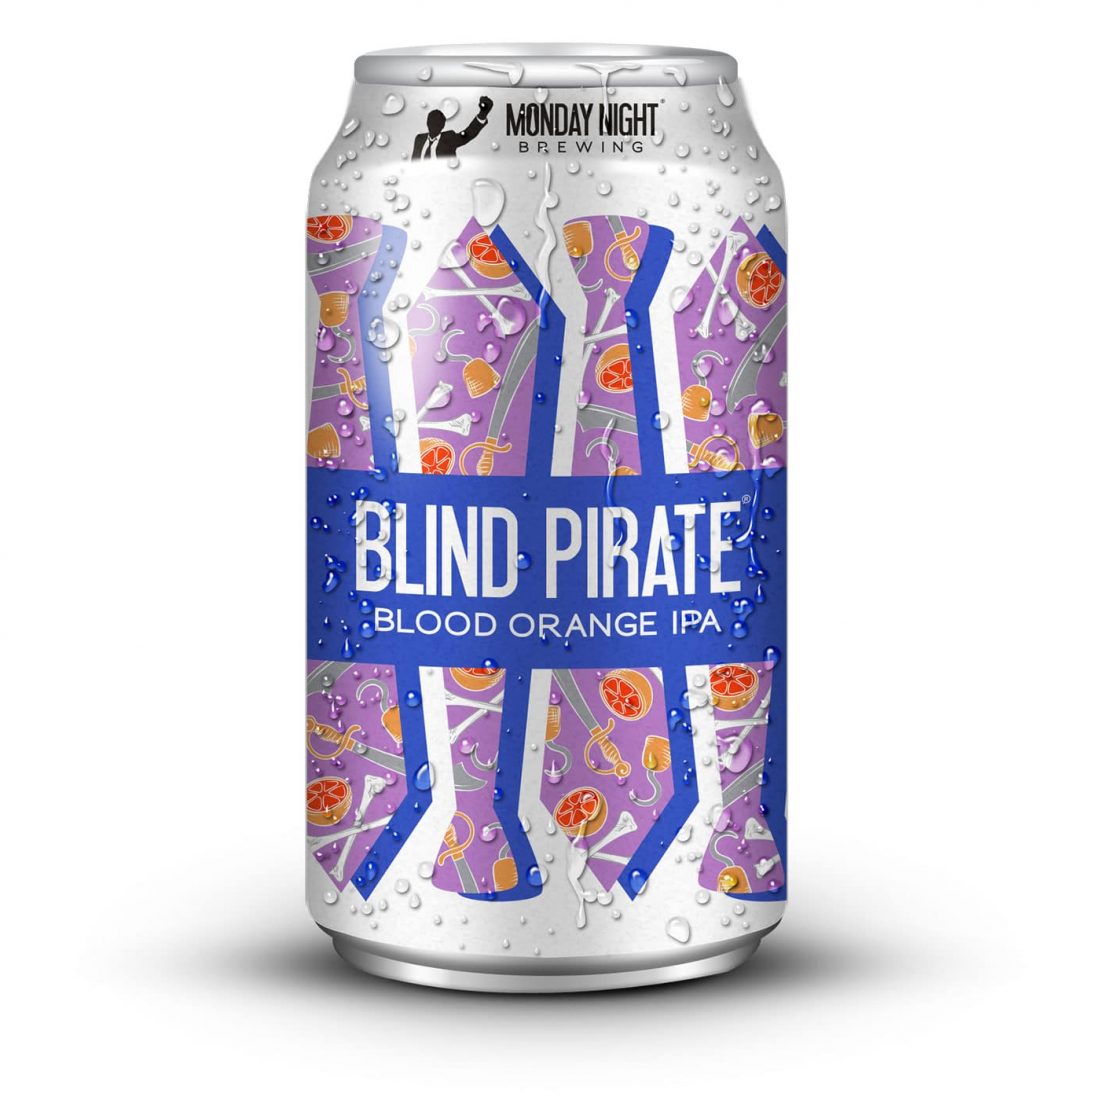 Monday NIght Blind Pirate can